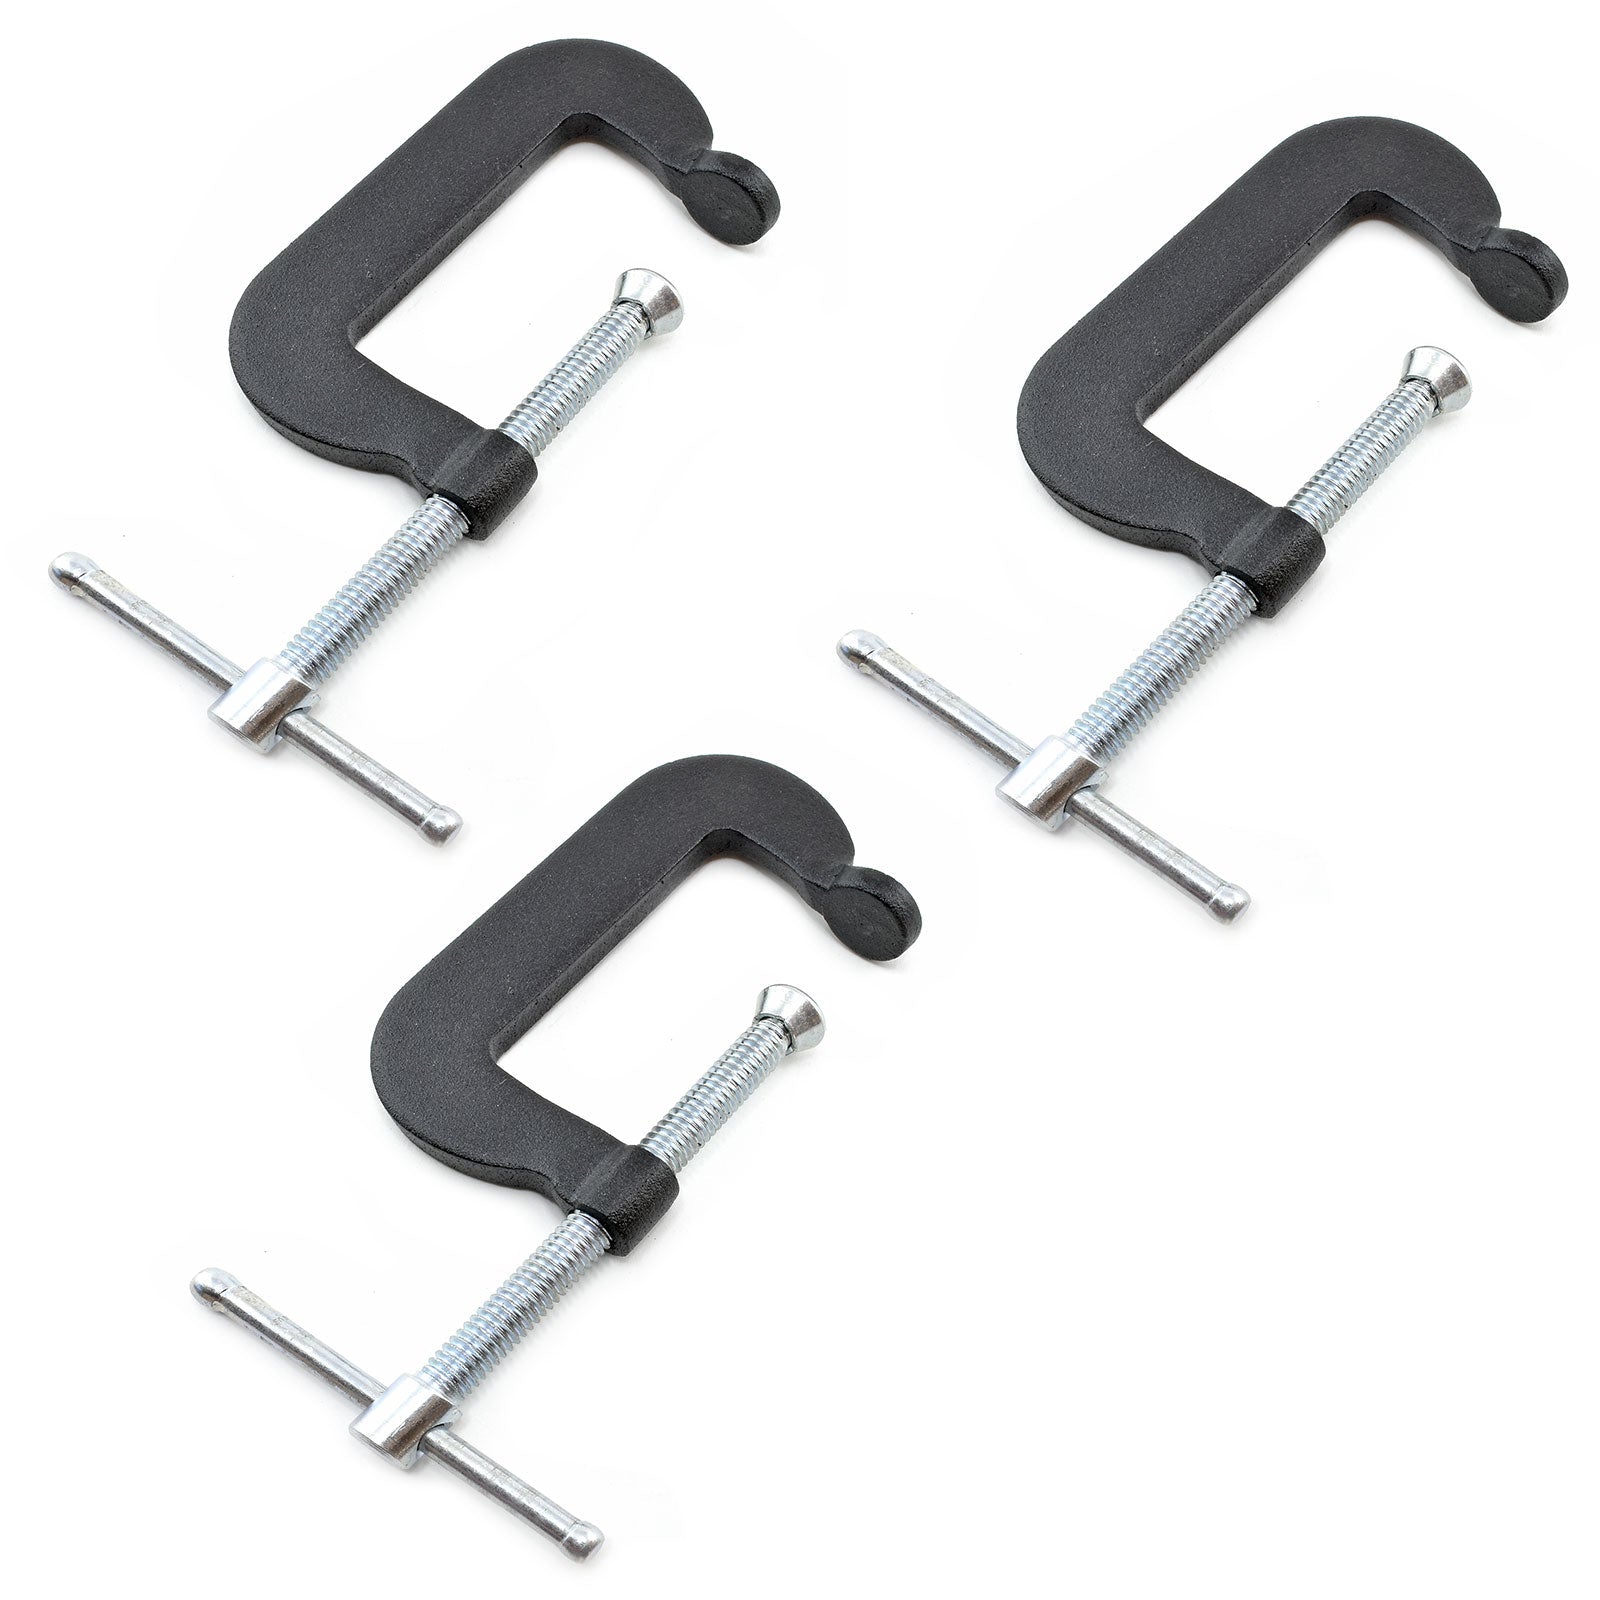 1.25" x 2" Miniature Forged Steel C - clamp, Set of 3